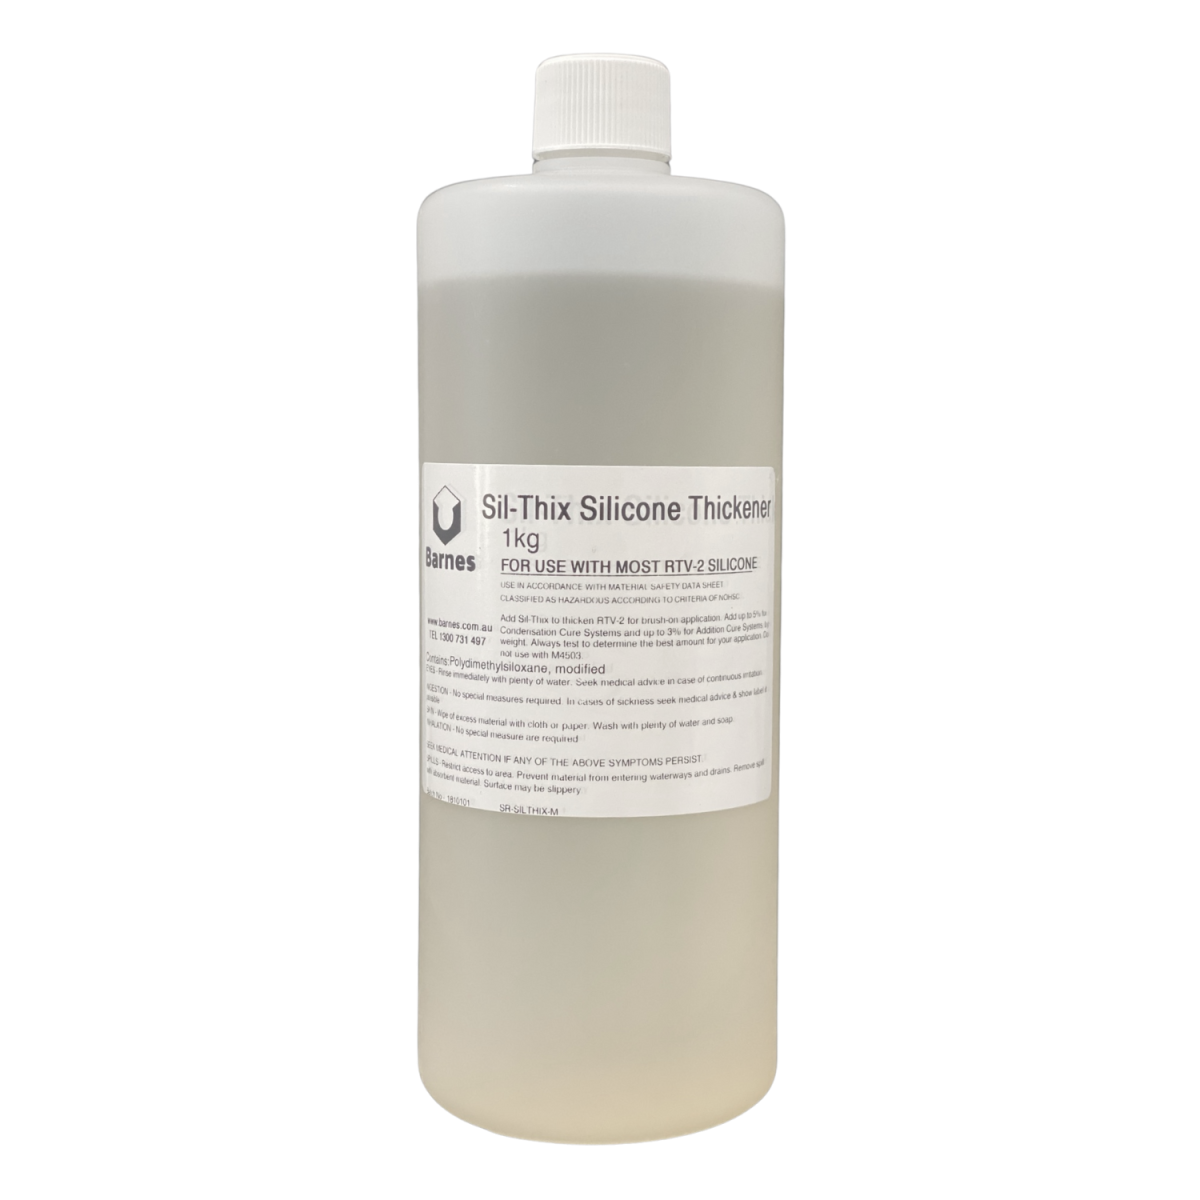 Sil-Thix Silicone Thickener